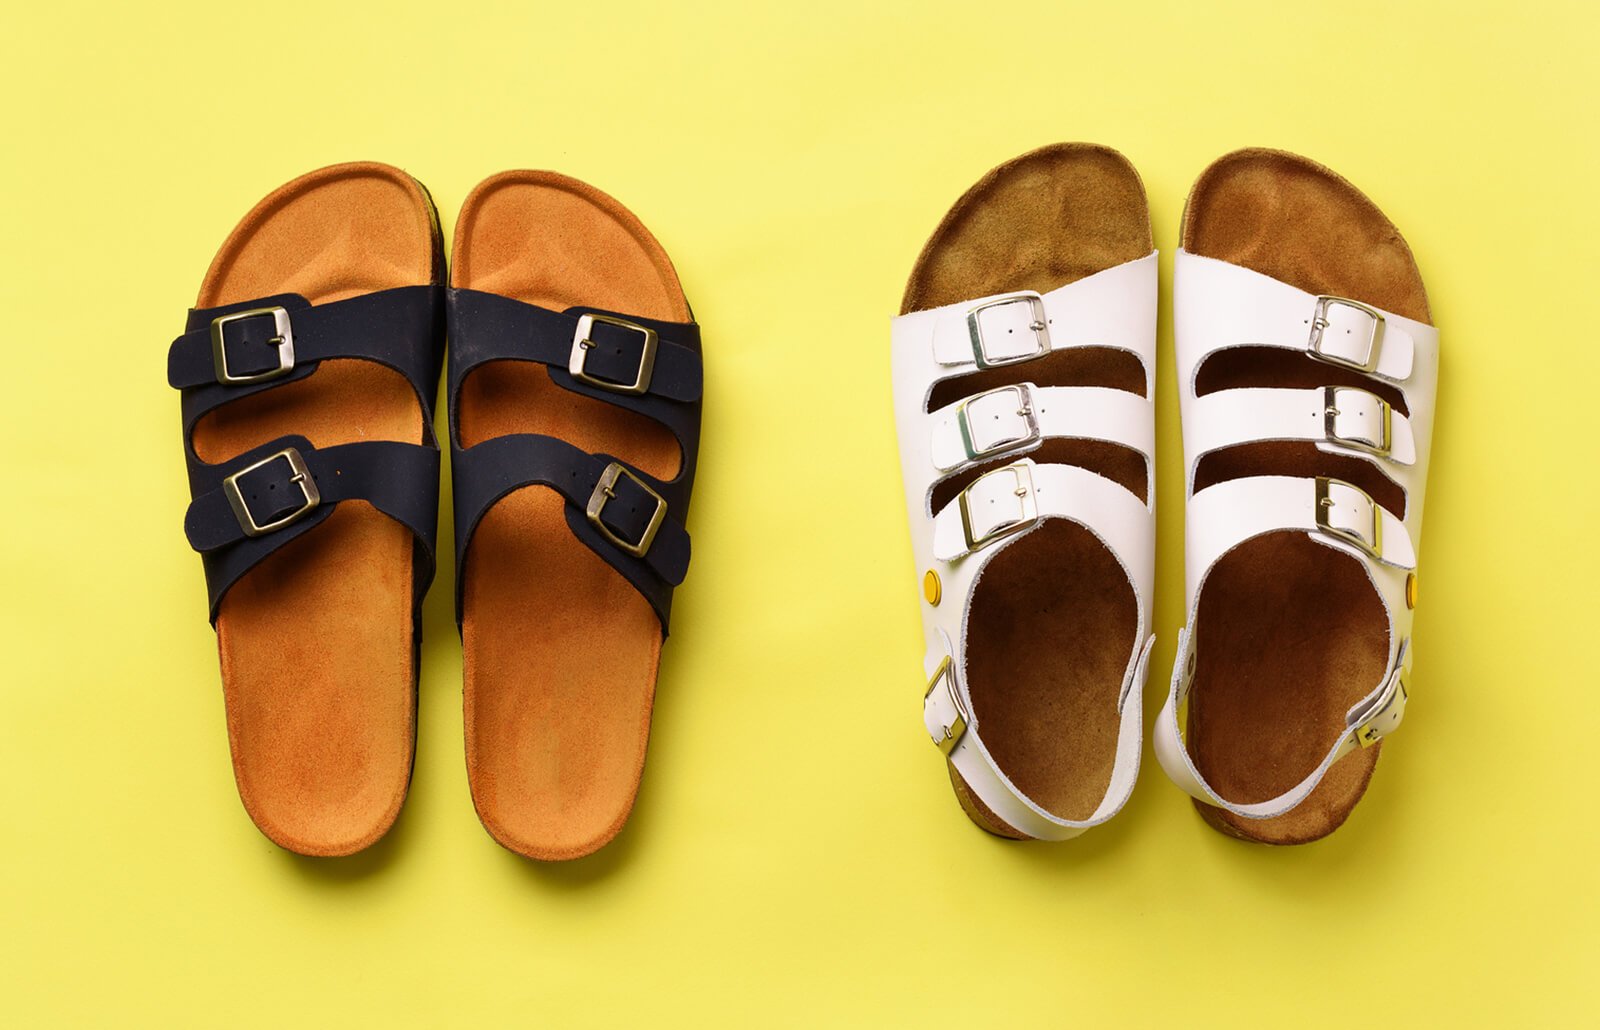 How To Clean Footbed Of Sandals